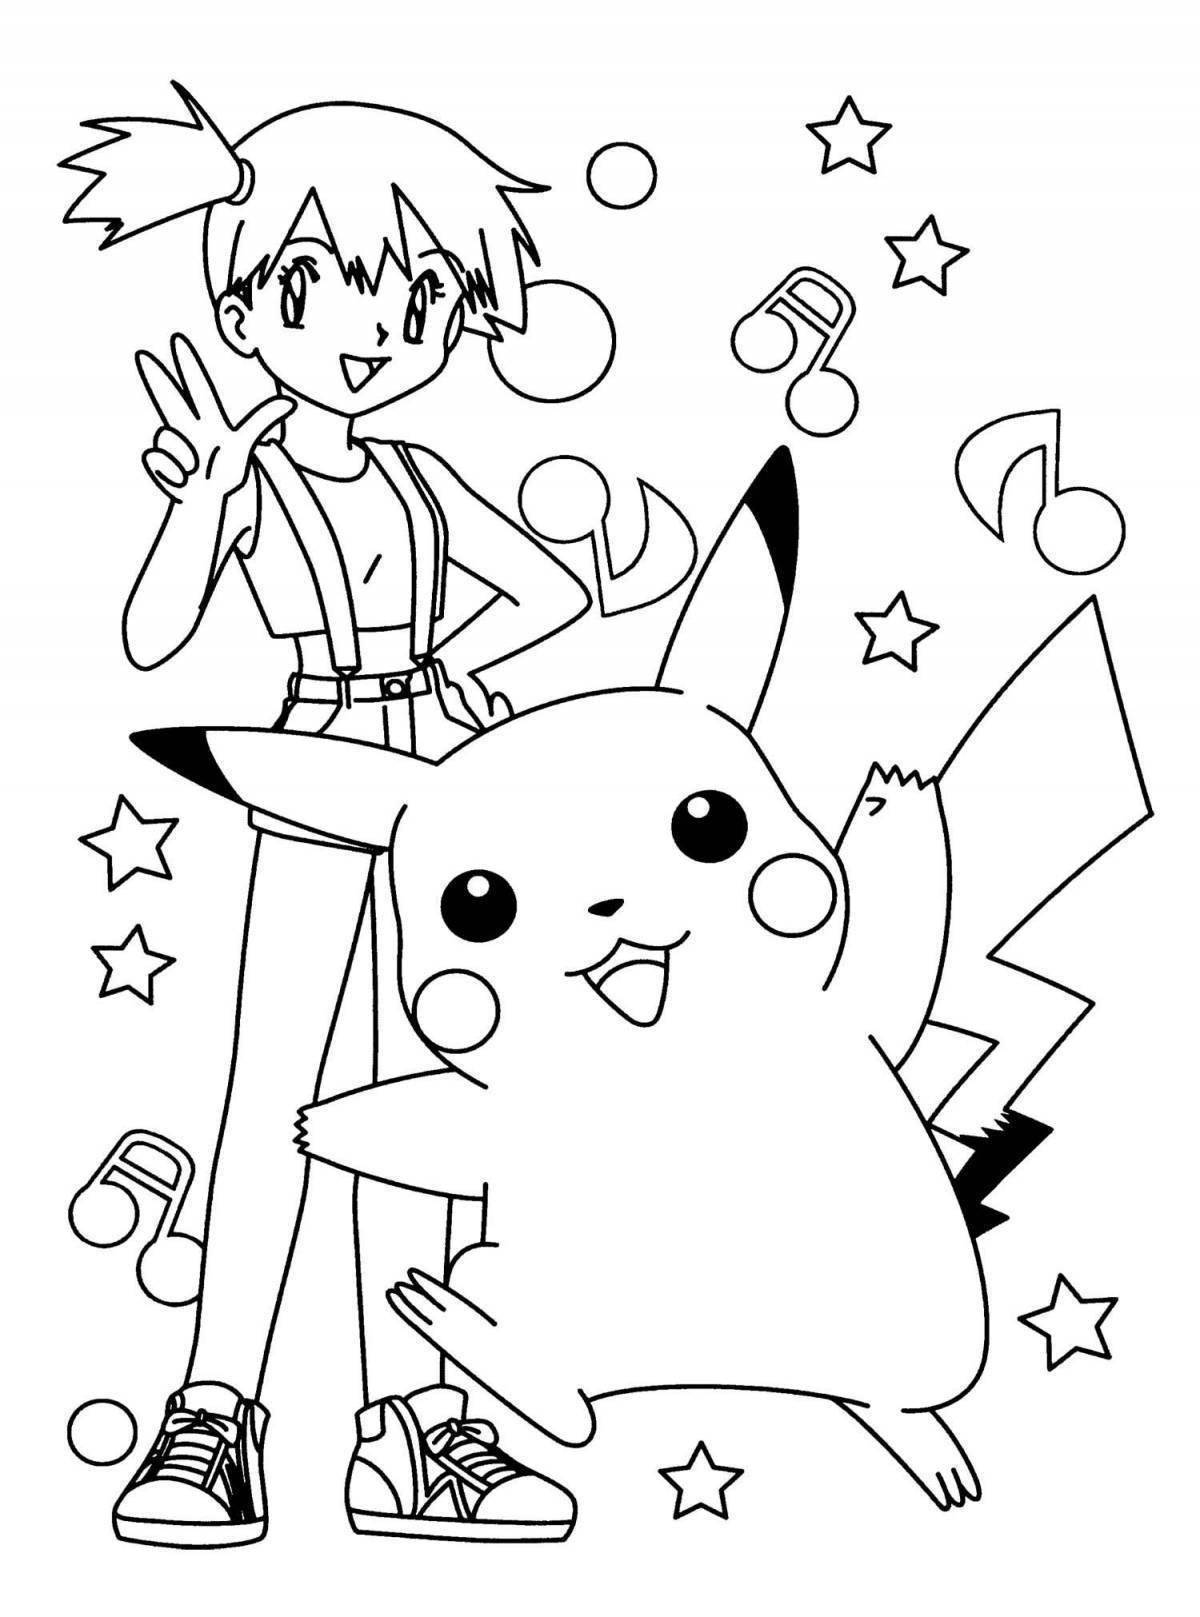 Great pikachu coloring book for girls